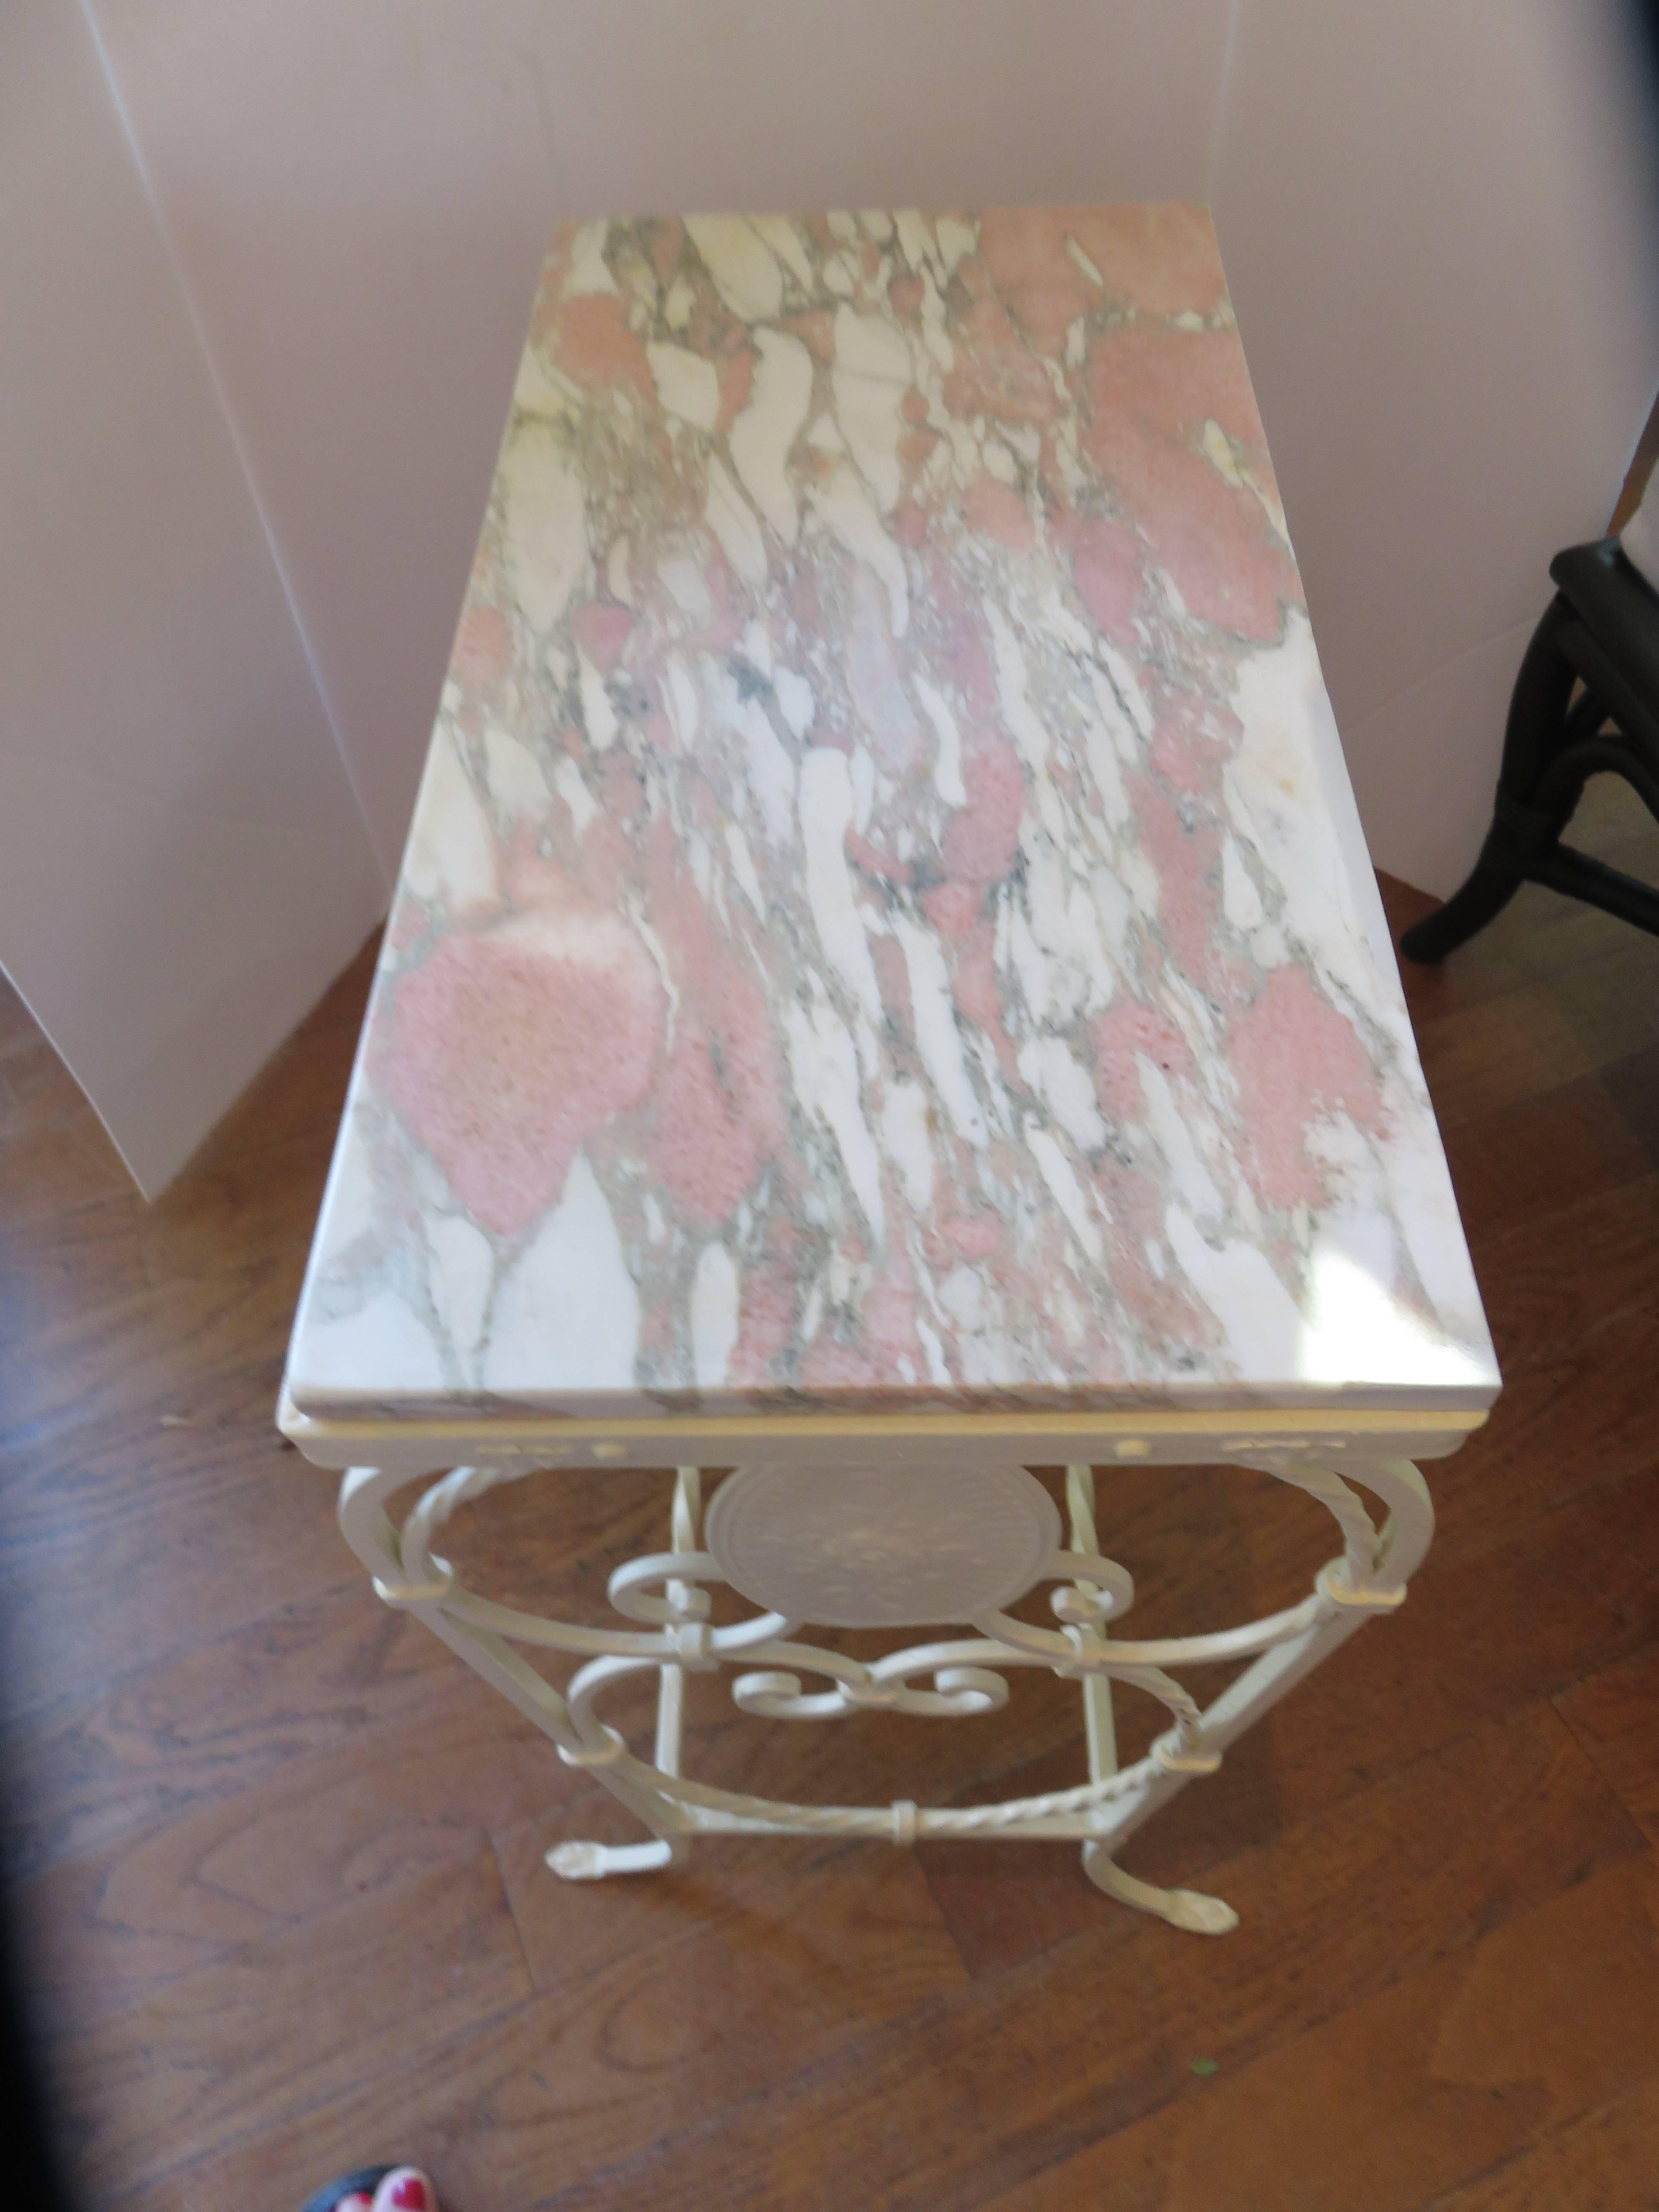 A French, Art Nouveau 1920s marble and iron side-table or end table. Rare coral/ pink and cream original marble top, handcrafted well detailed iron work, lovely piece.